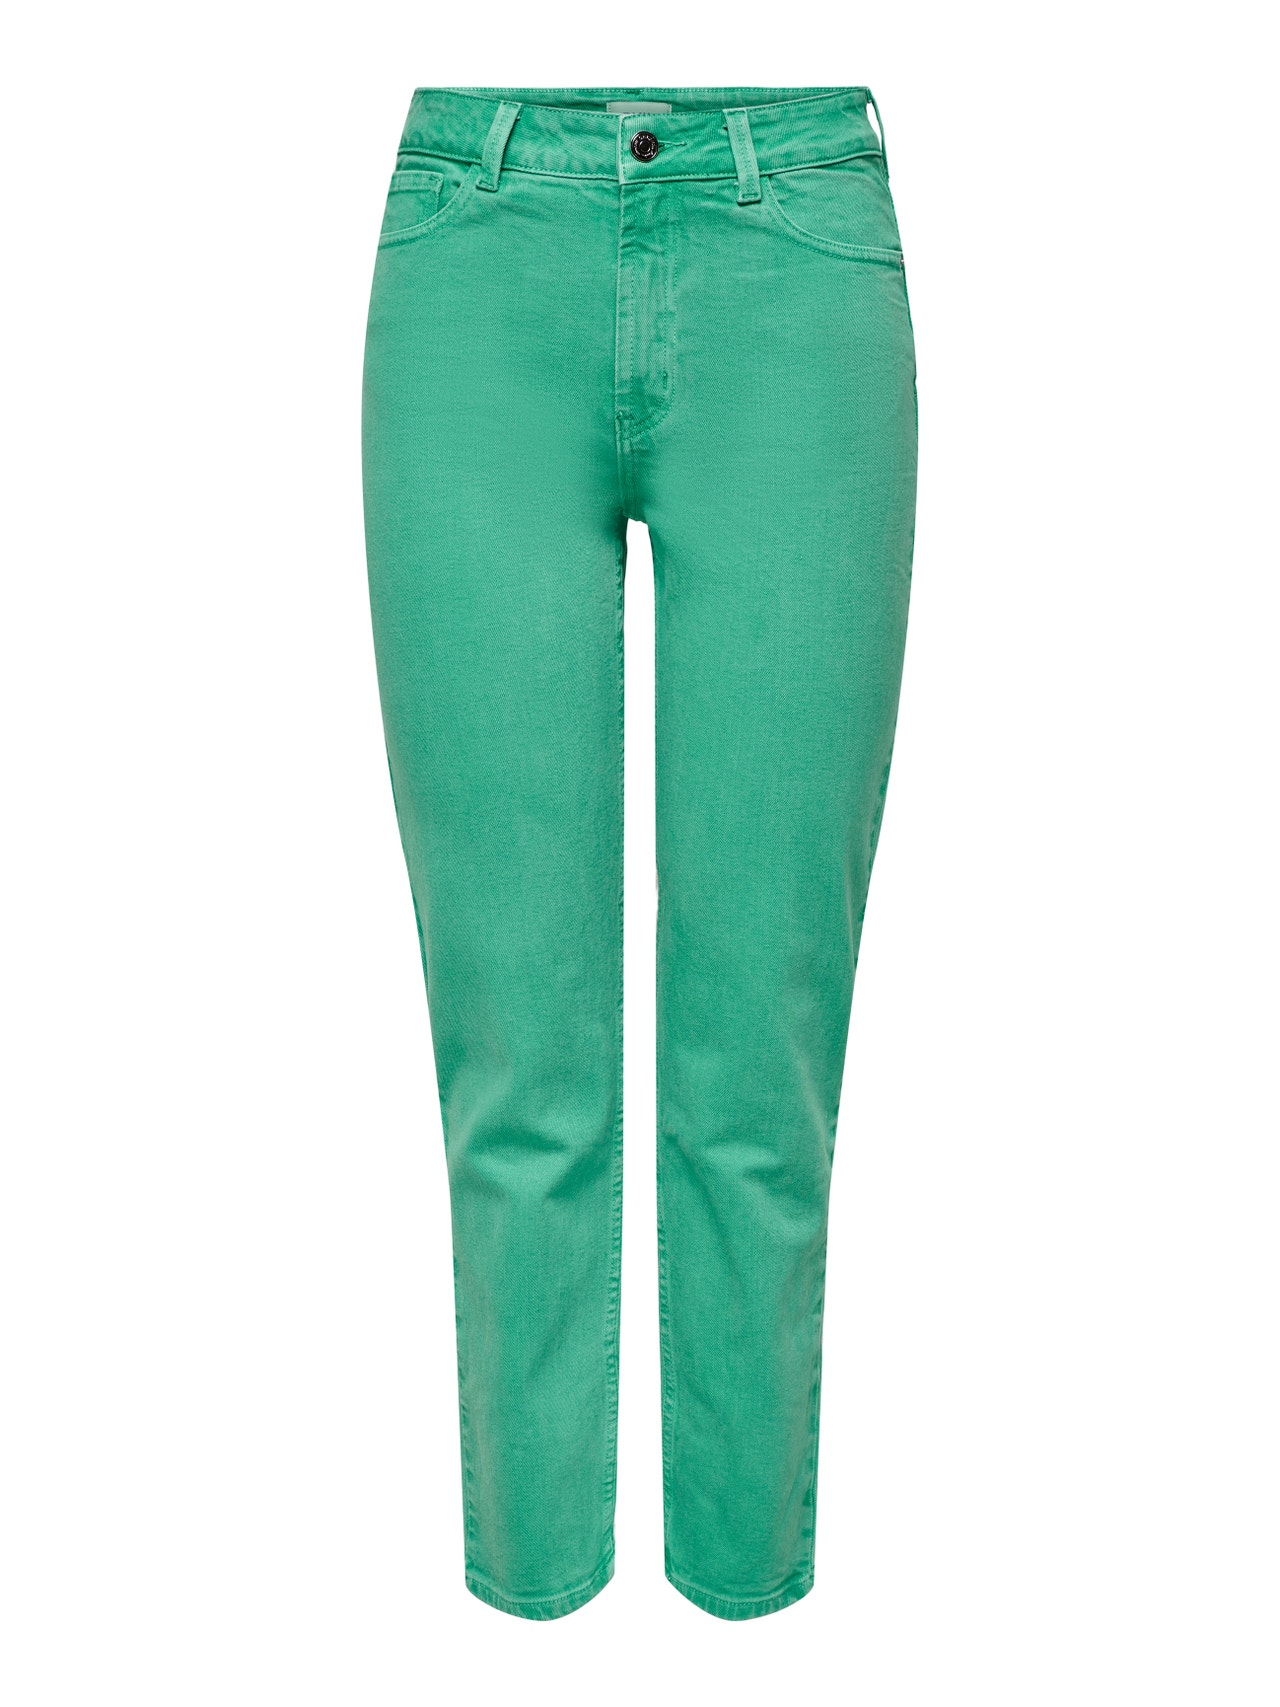 ONLY Straight Fit High waist Trousers -Marine Green - 15252531